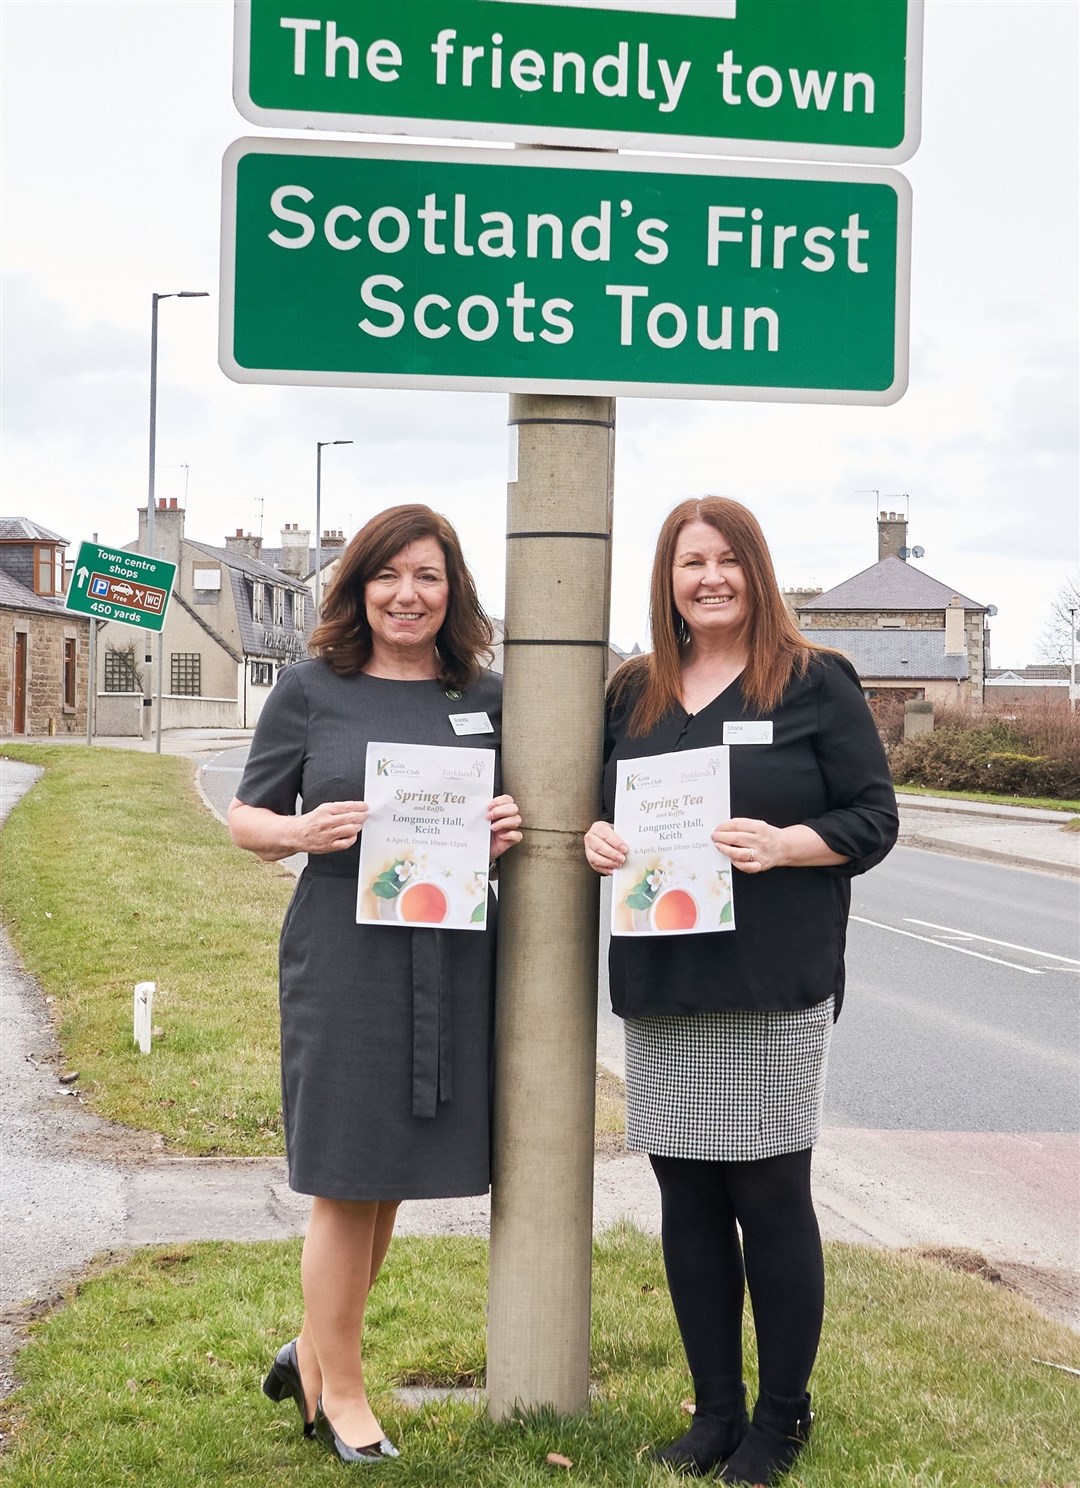 Care home managers Brenda Harper (left) and Shona Conlin hope to harness Friendly Town's community spirit.